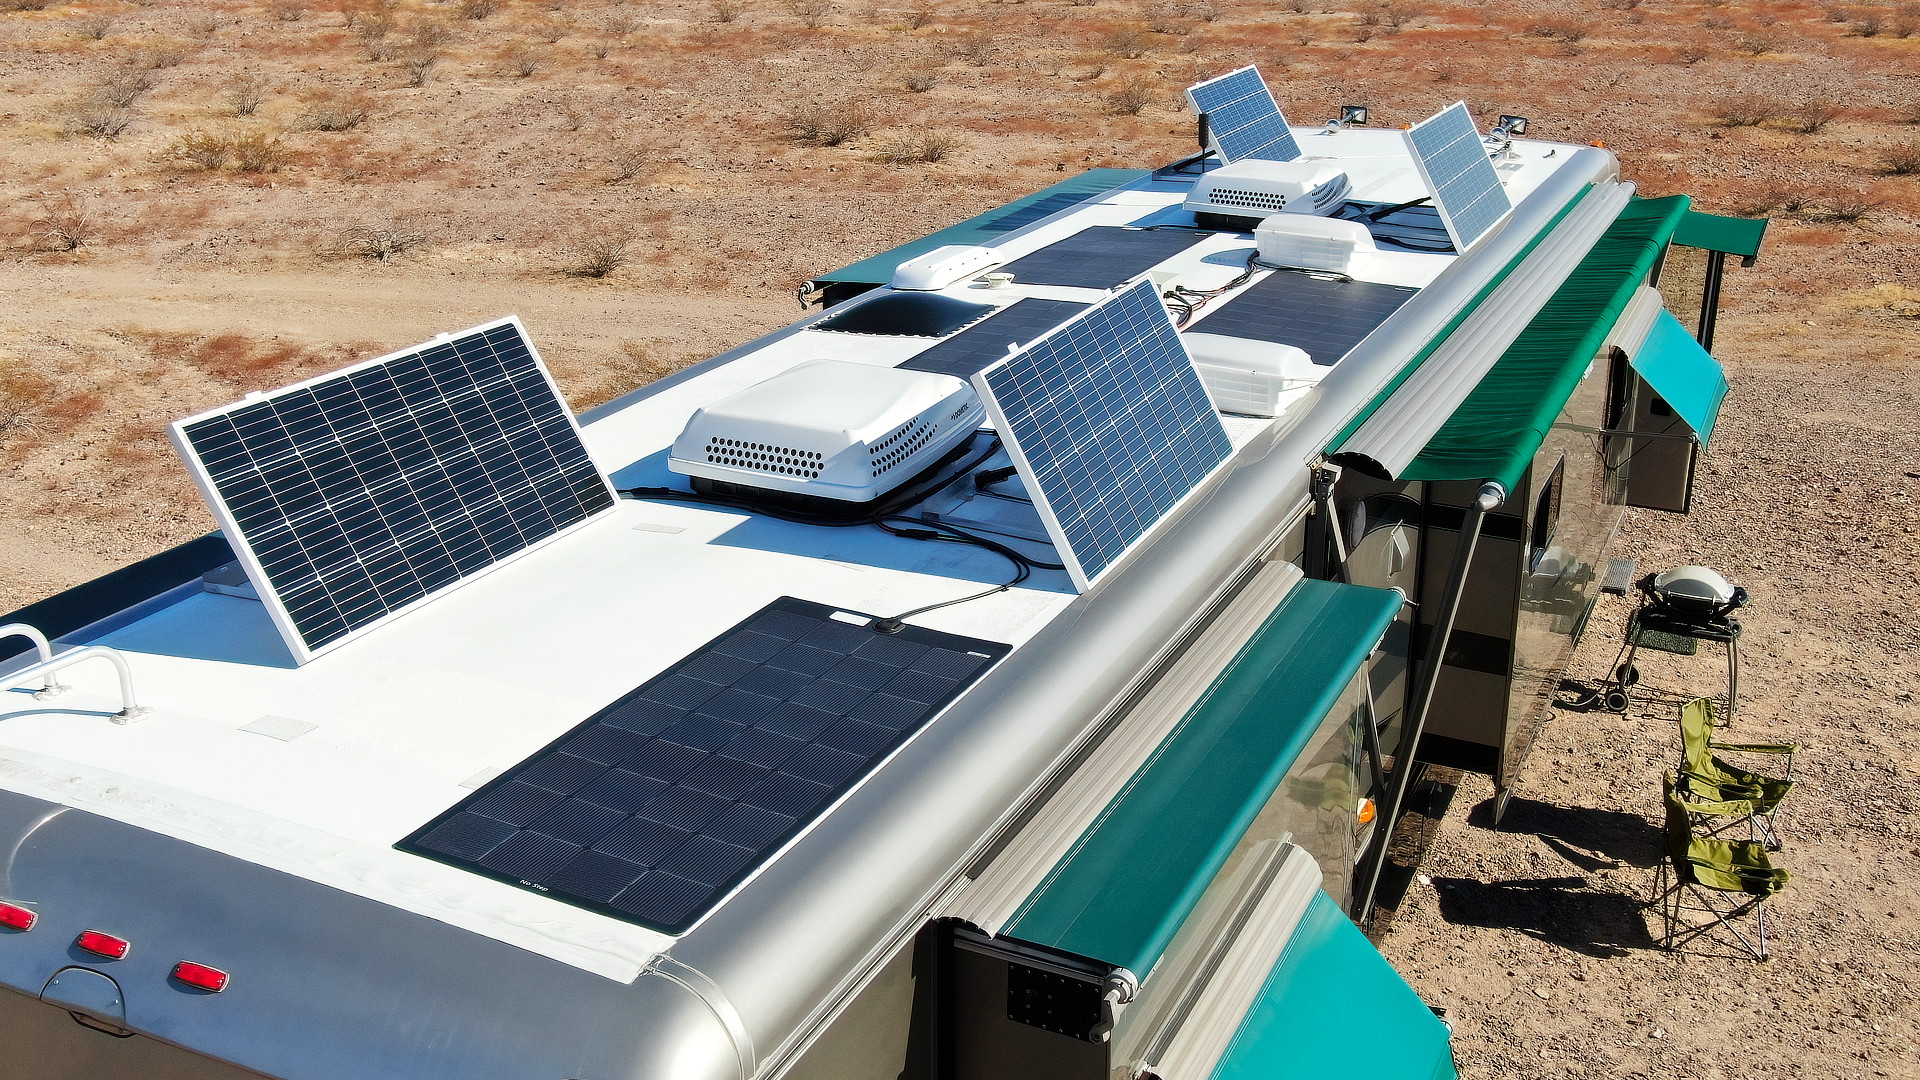 A large solar array like ours can provide power to help keep an RV cool in summer